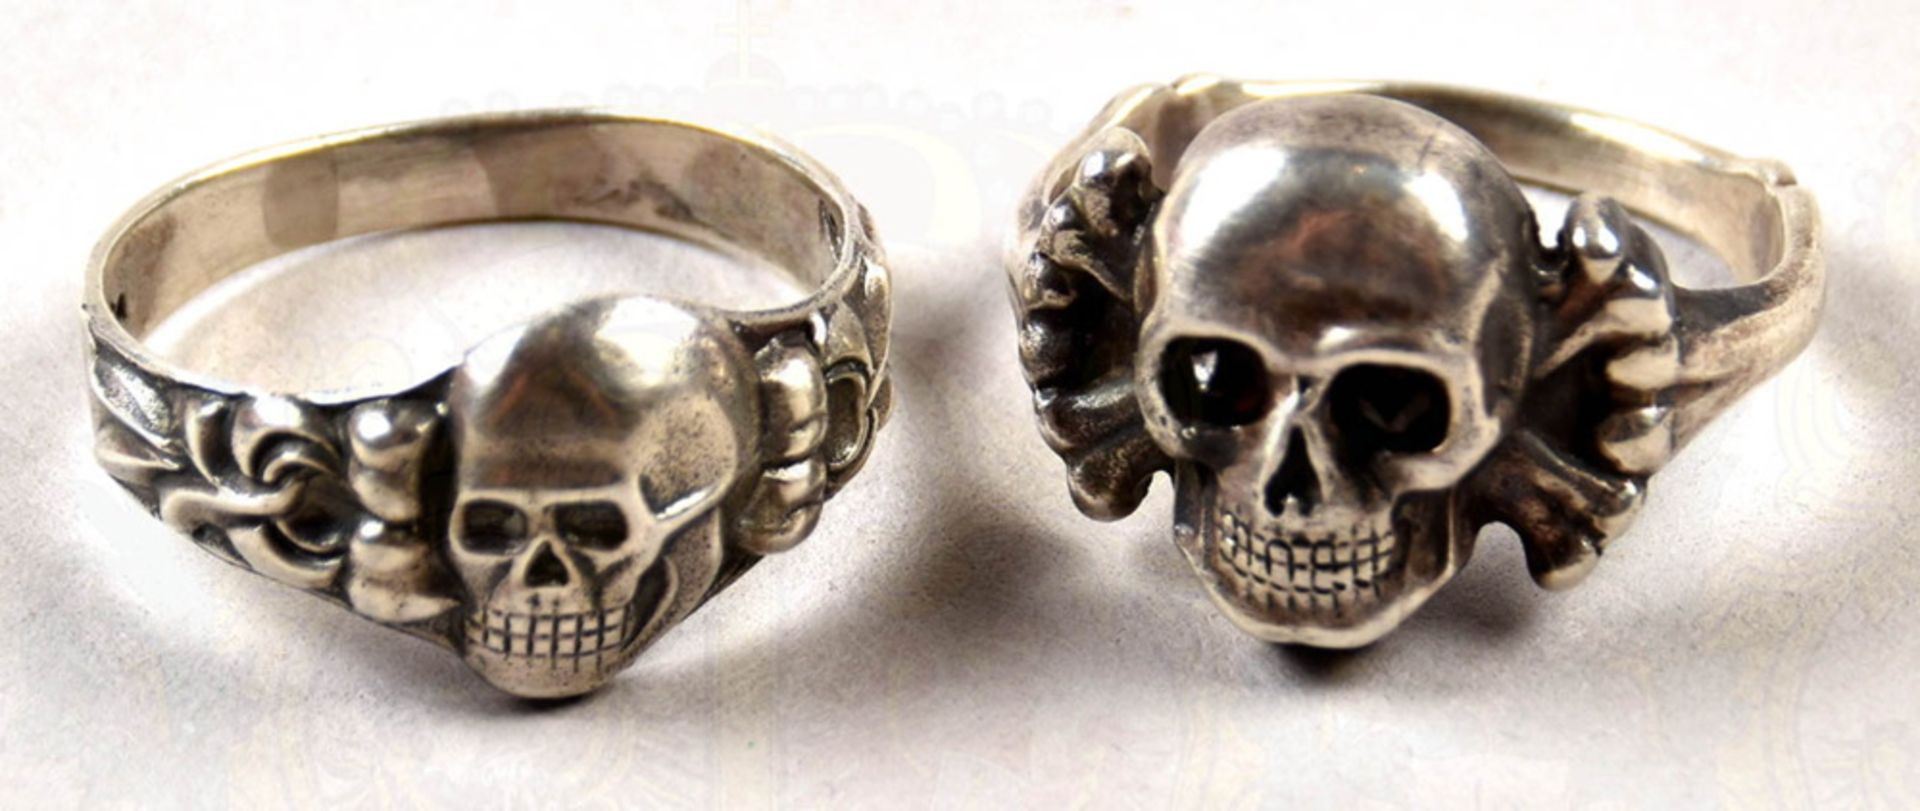 2 silver made death head finger rings - Image 2 of 4